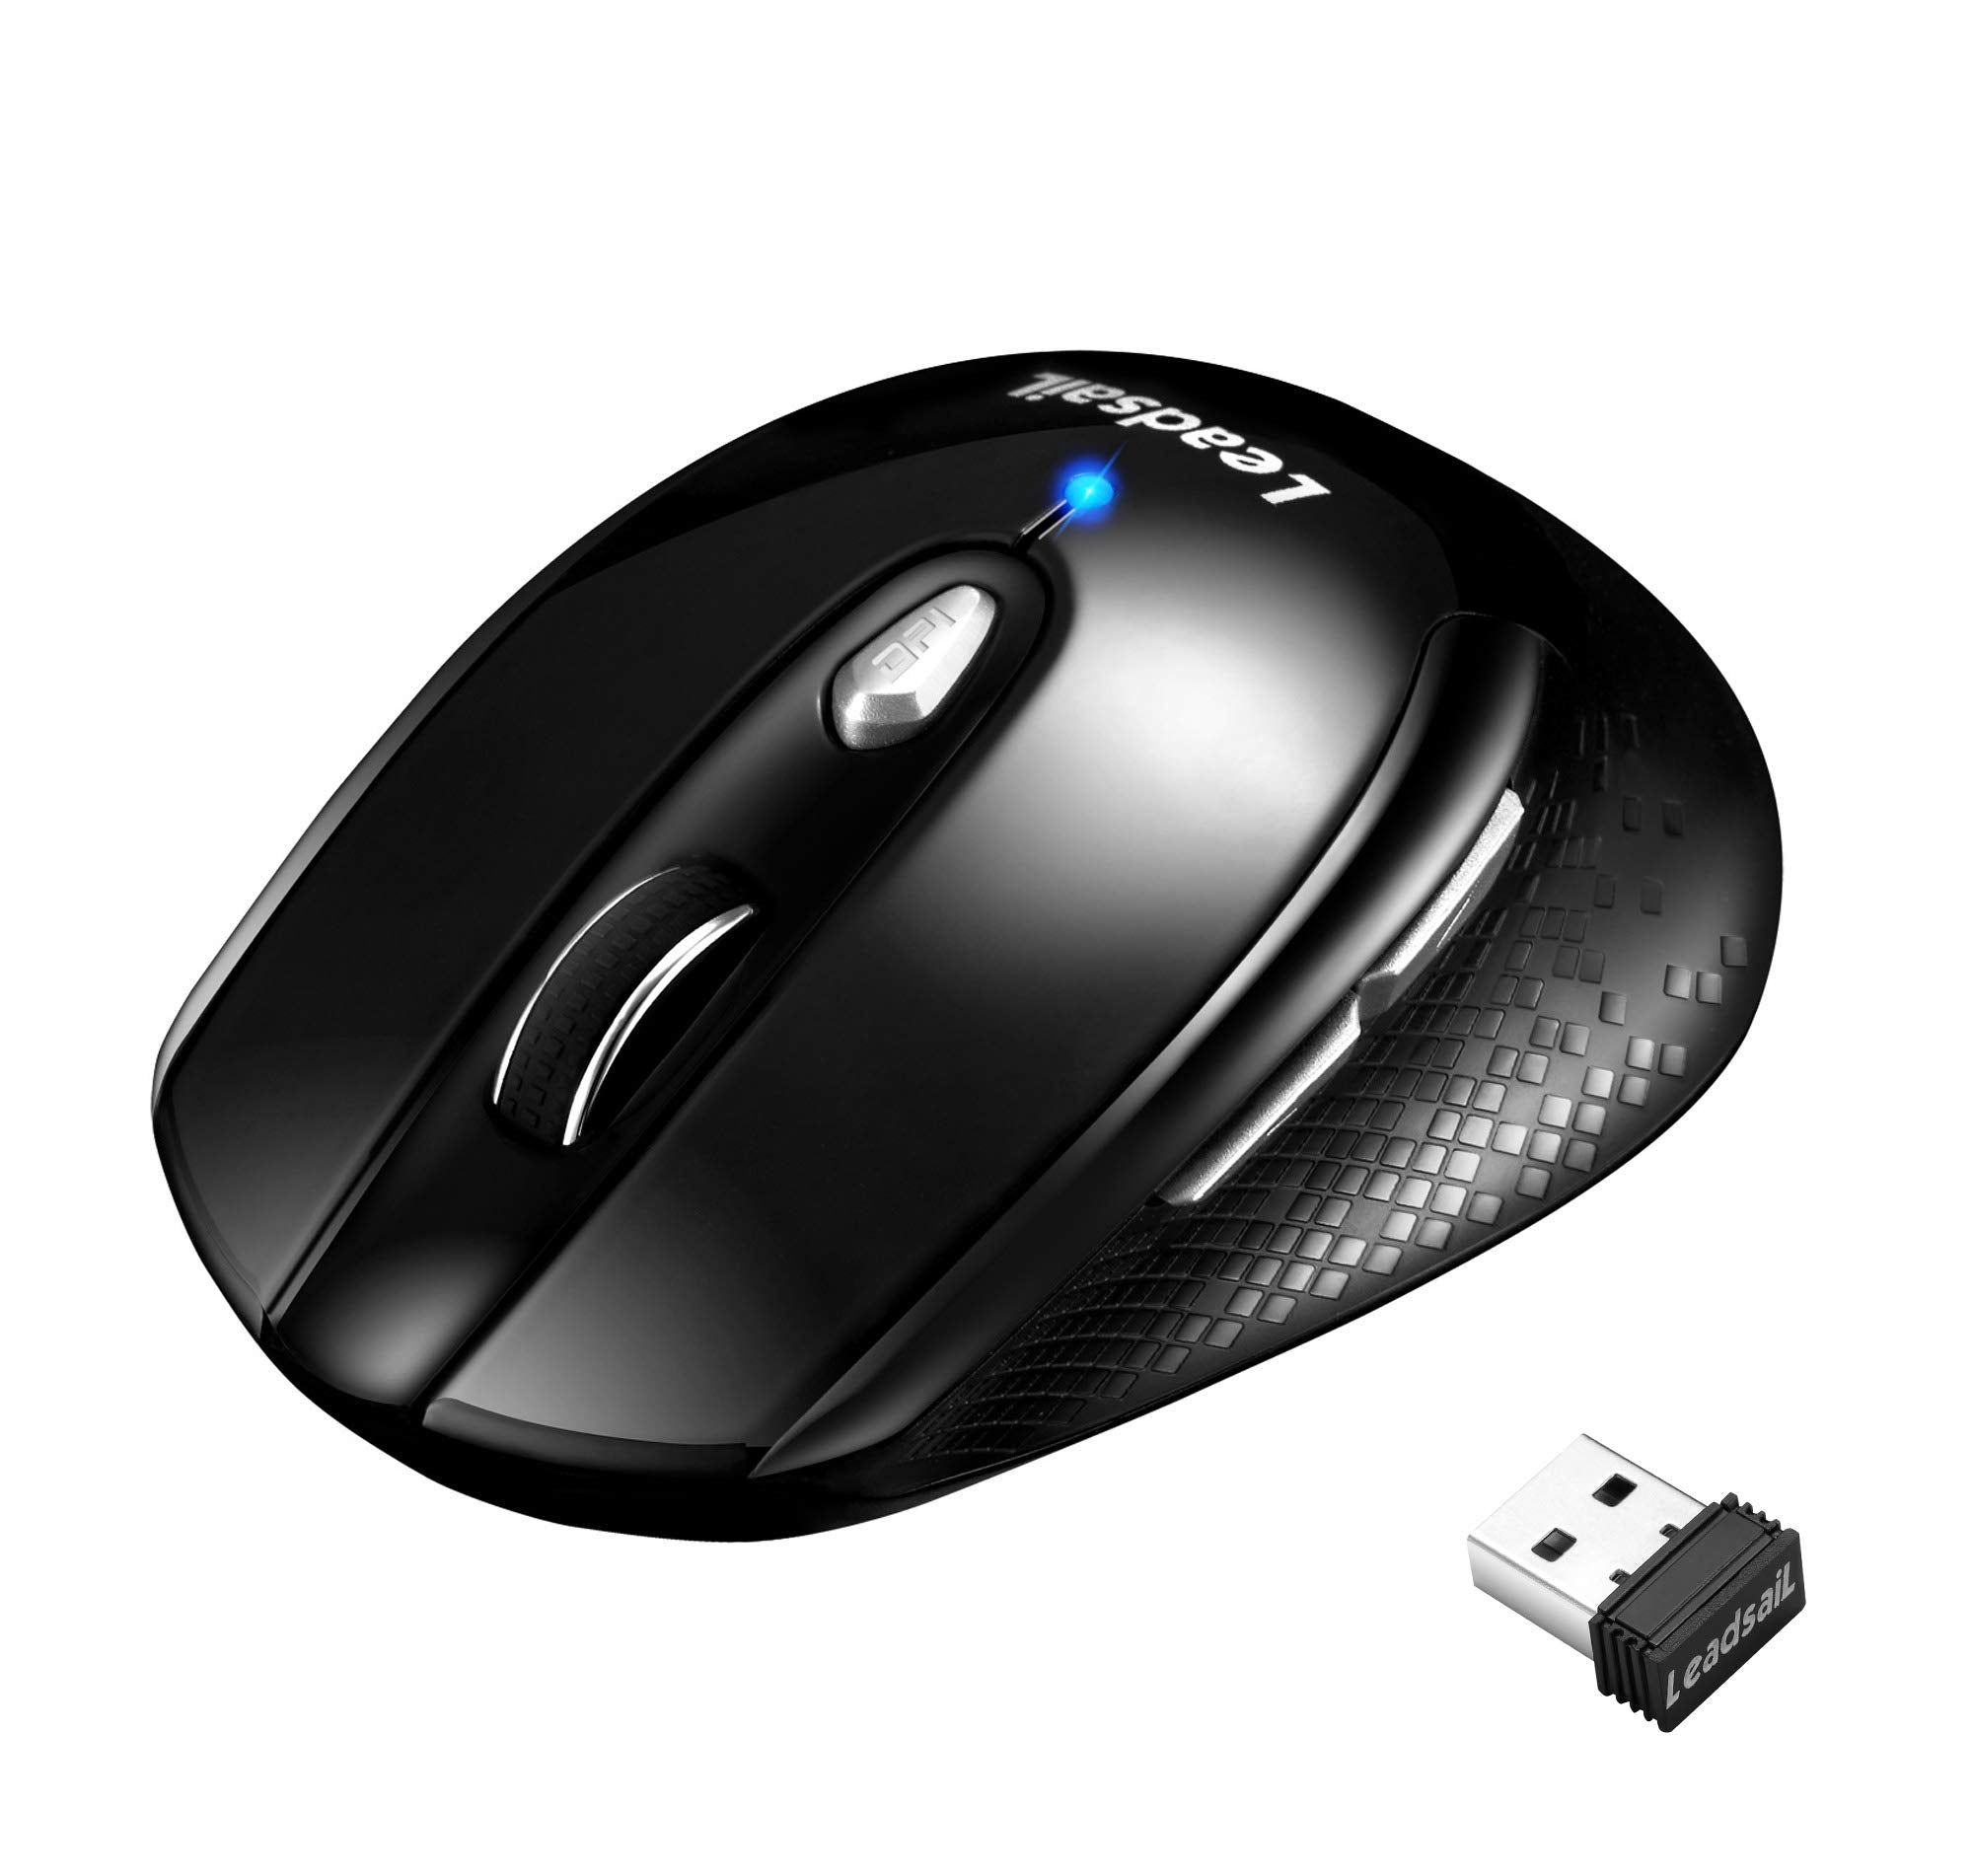 Wireless Mouse for Laptop Silent Cordless USB Mouse Wireless Optical Computer Mouse, 6 Buttons,1600DPI with 3 Adjustable Levels for Windows 10/8/7/XP/Mac/Macbook Pro/Air/HP/Acer